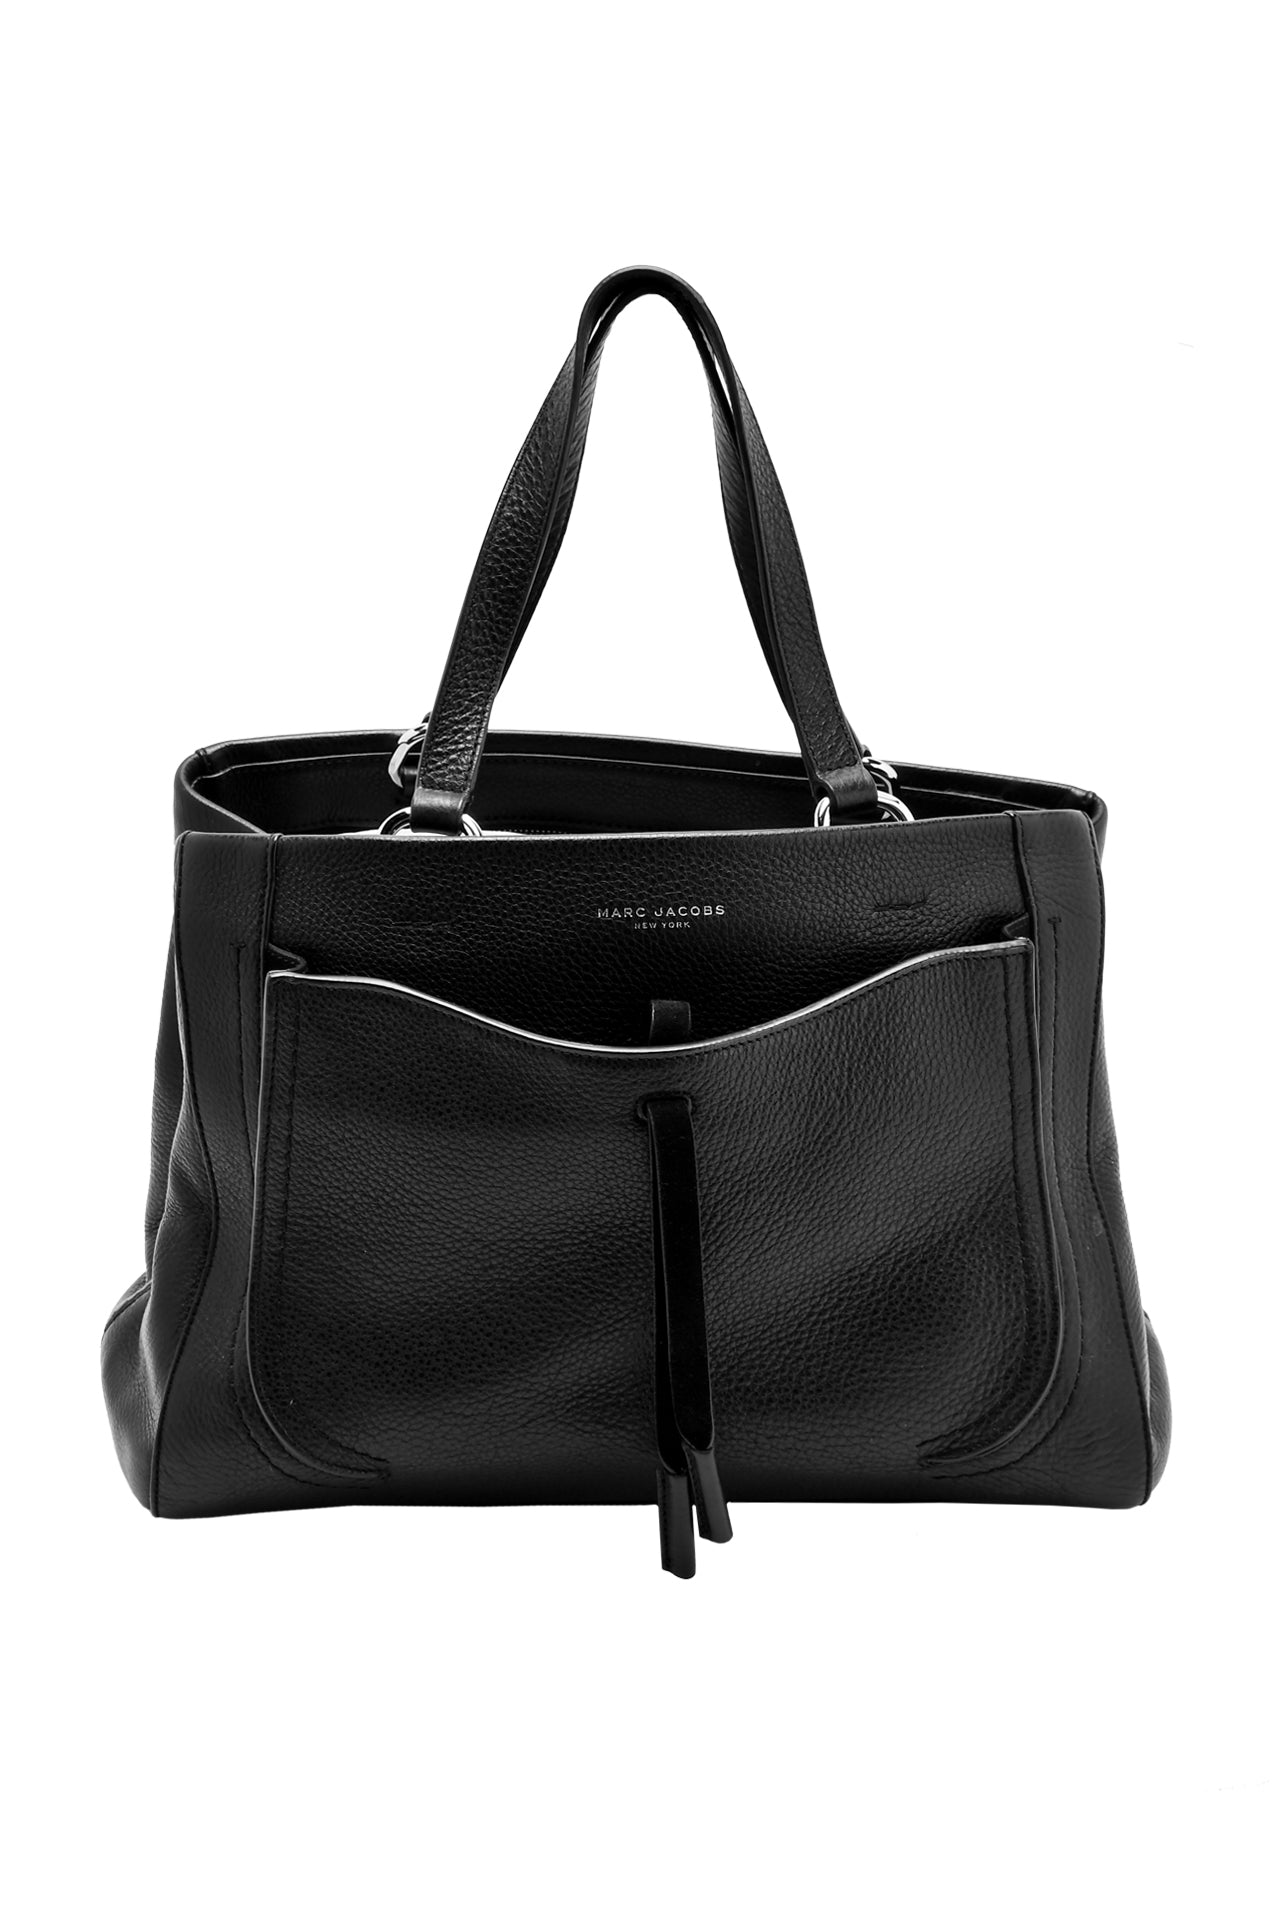 Marc Jacobs Grained Leather Bag Black